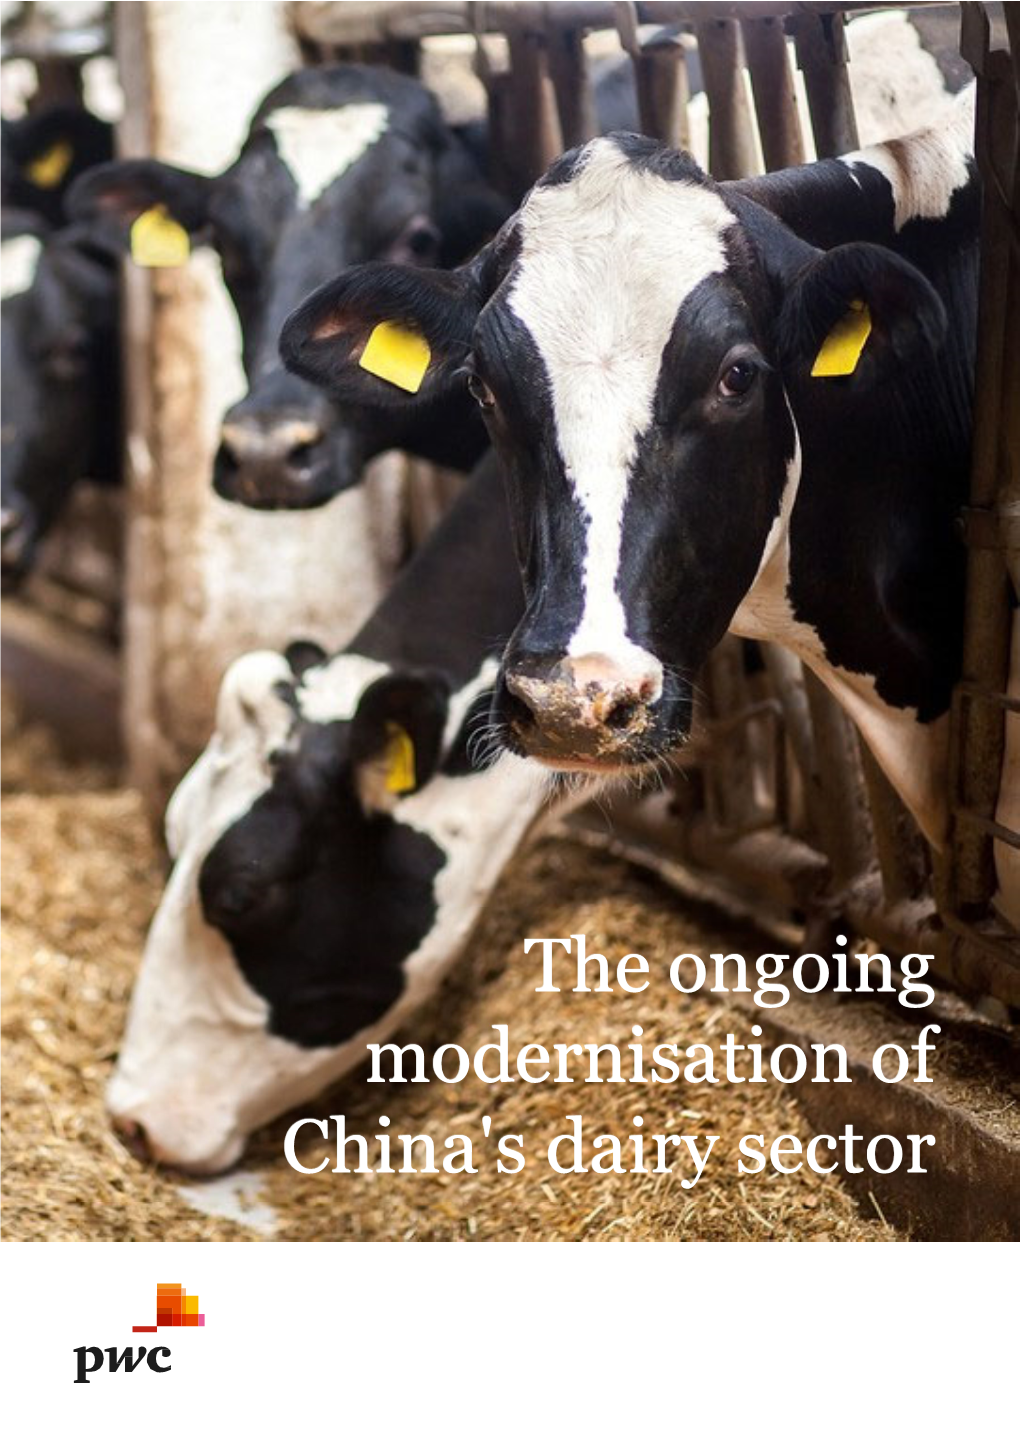 Dairy Sector